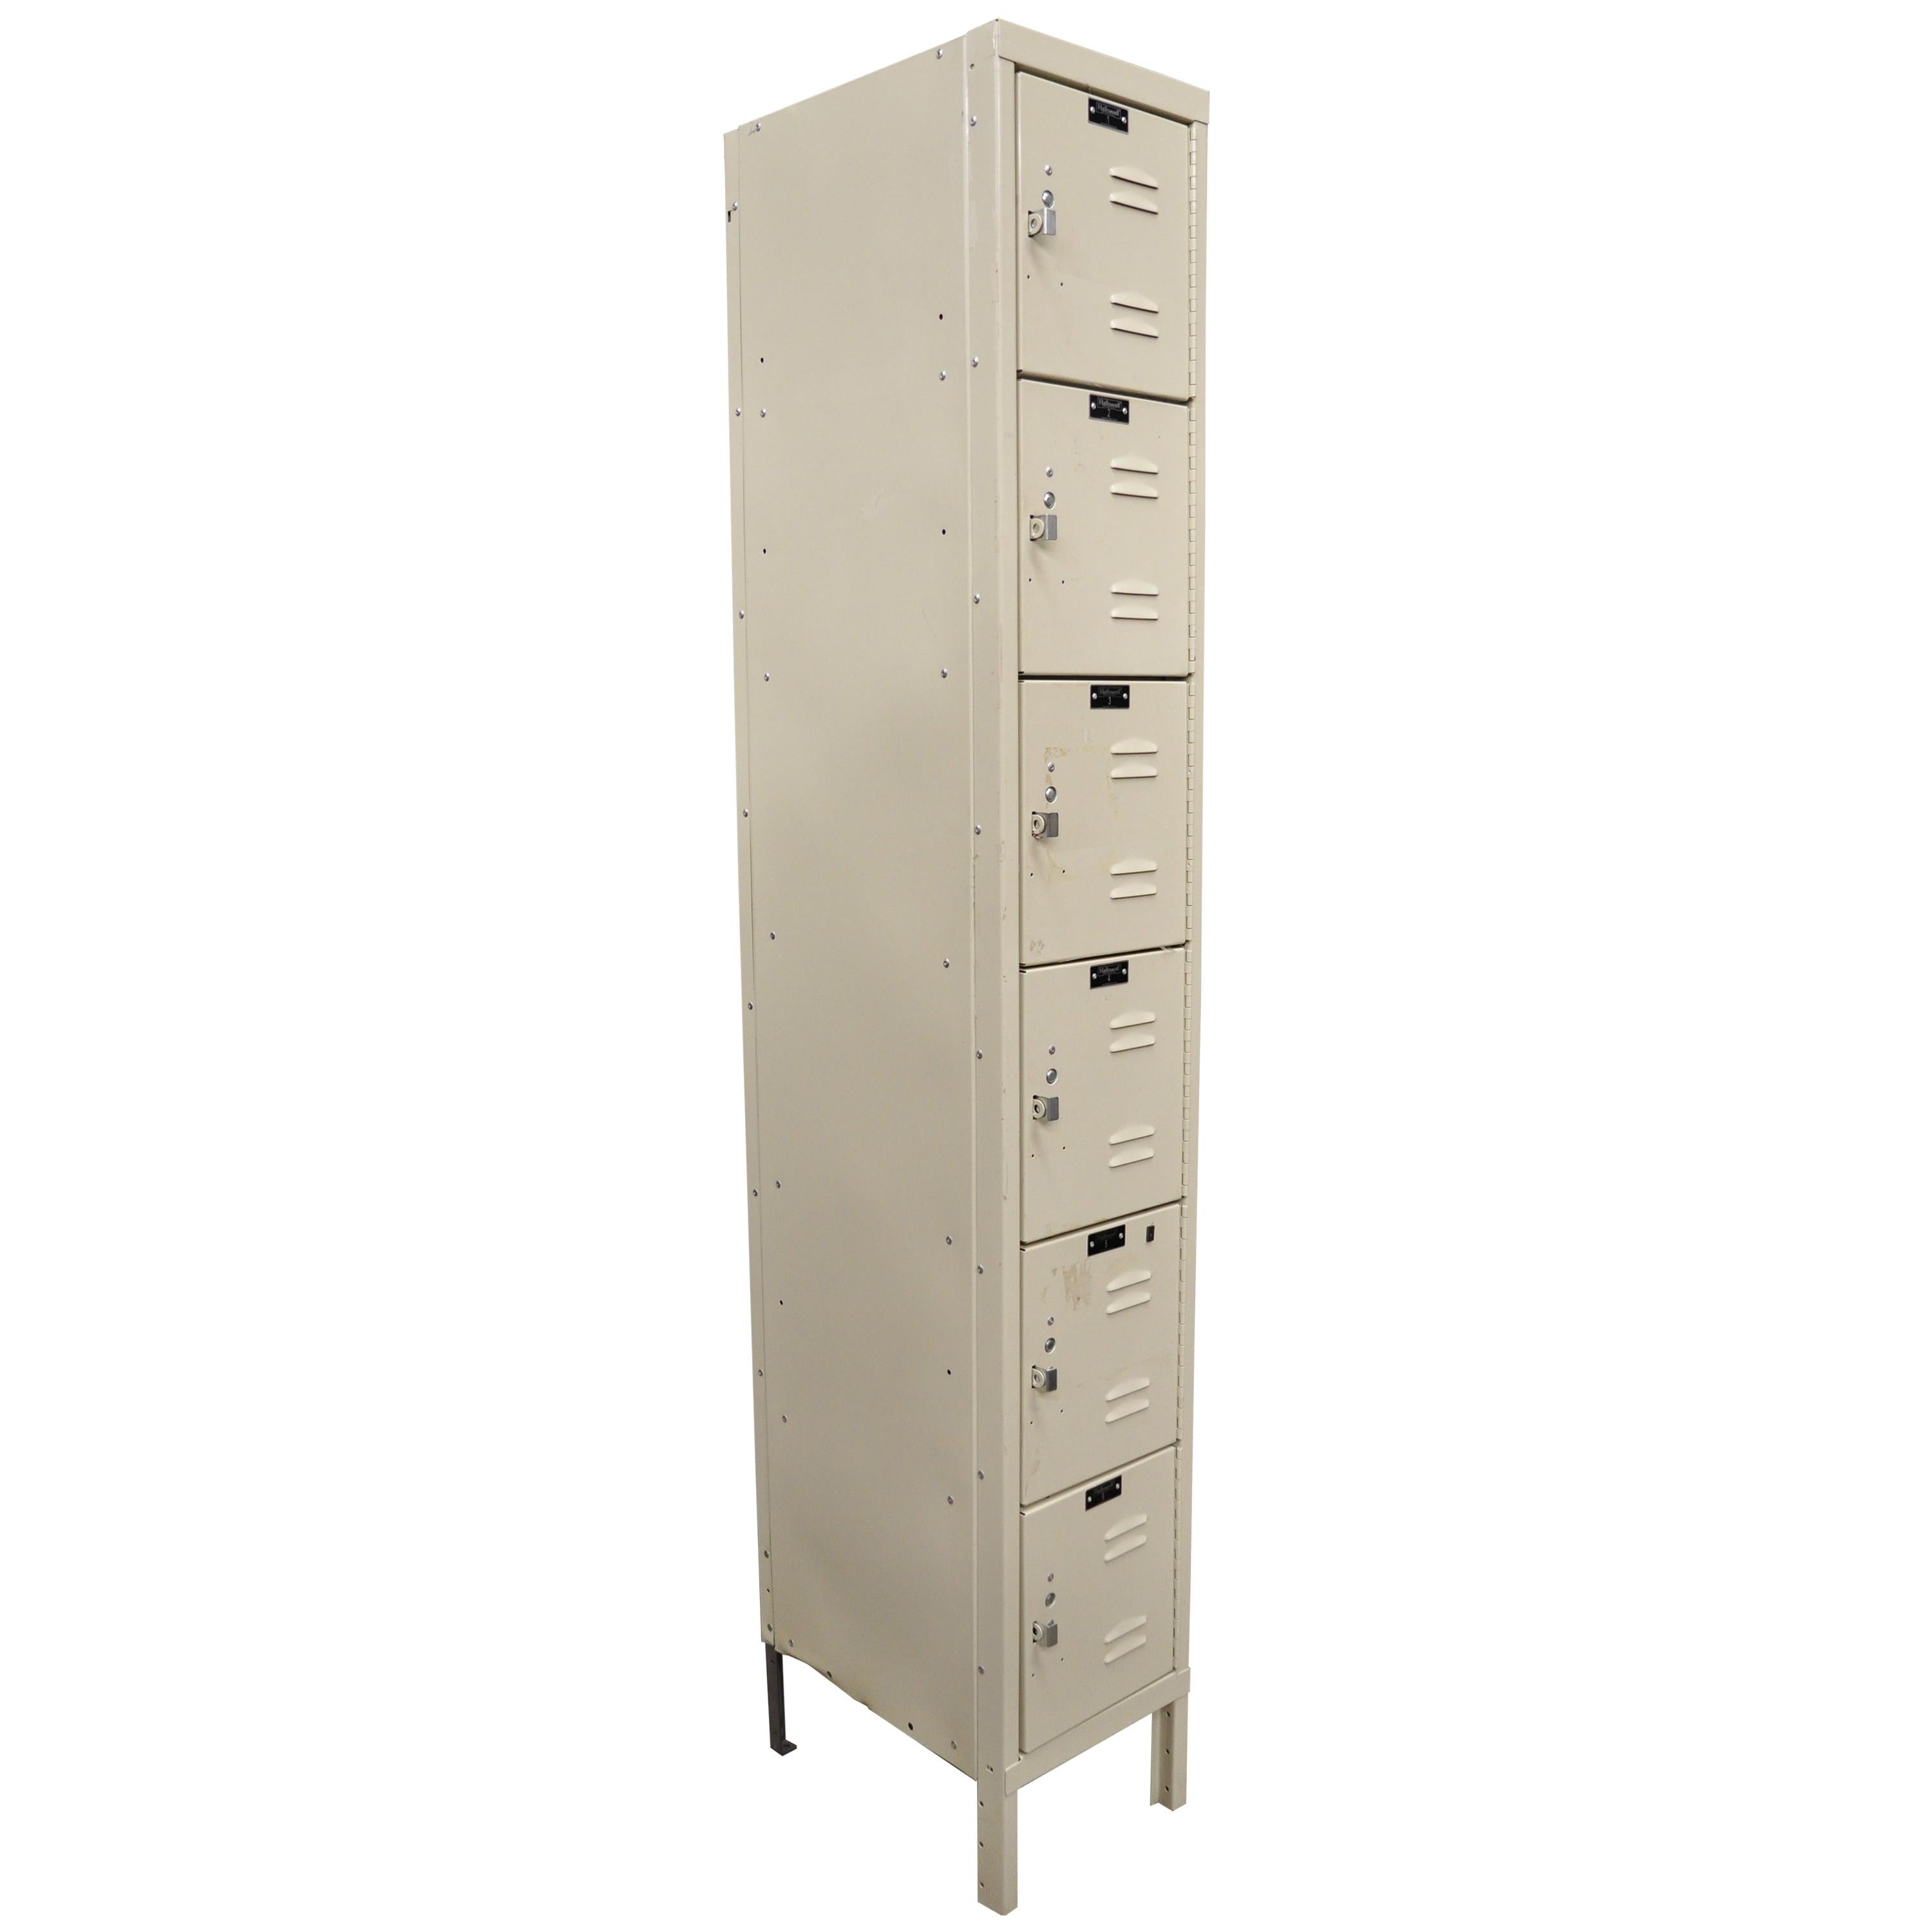 Details about   Locker Cabinet with 6 Compartment Metal Storage GYM School Warehouse Dressing 